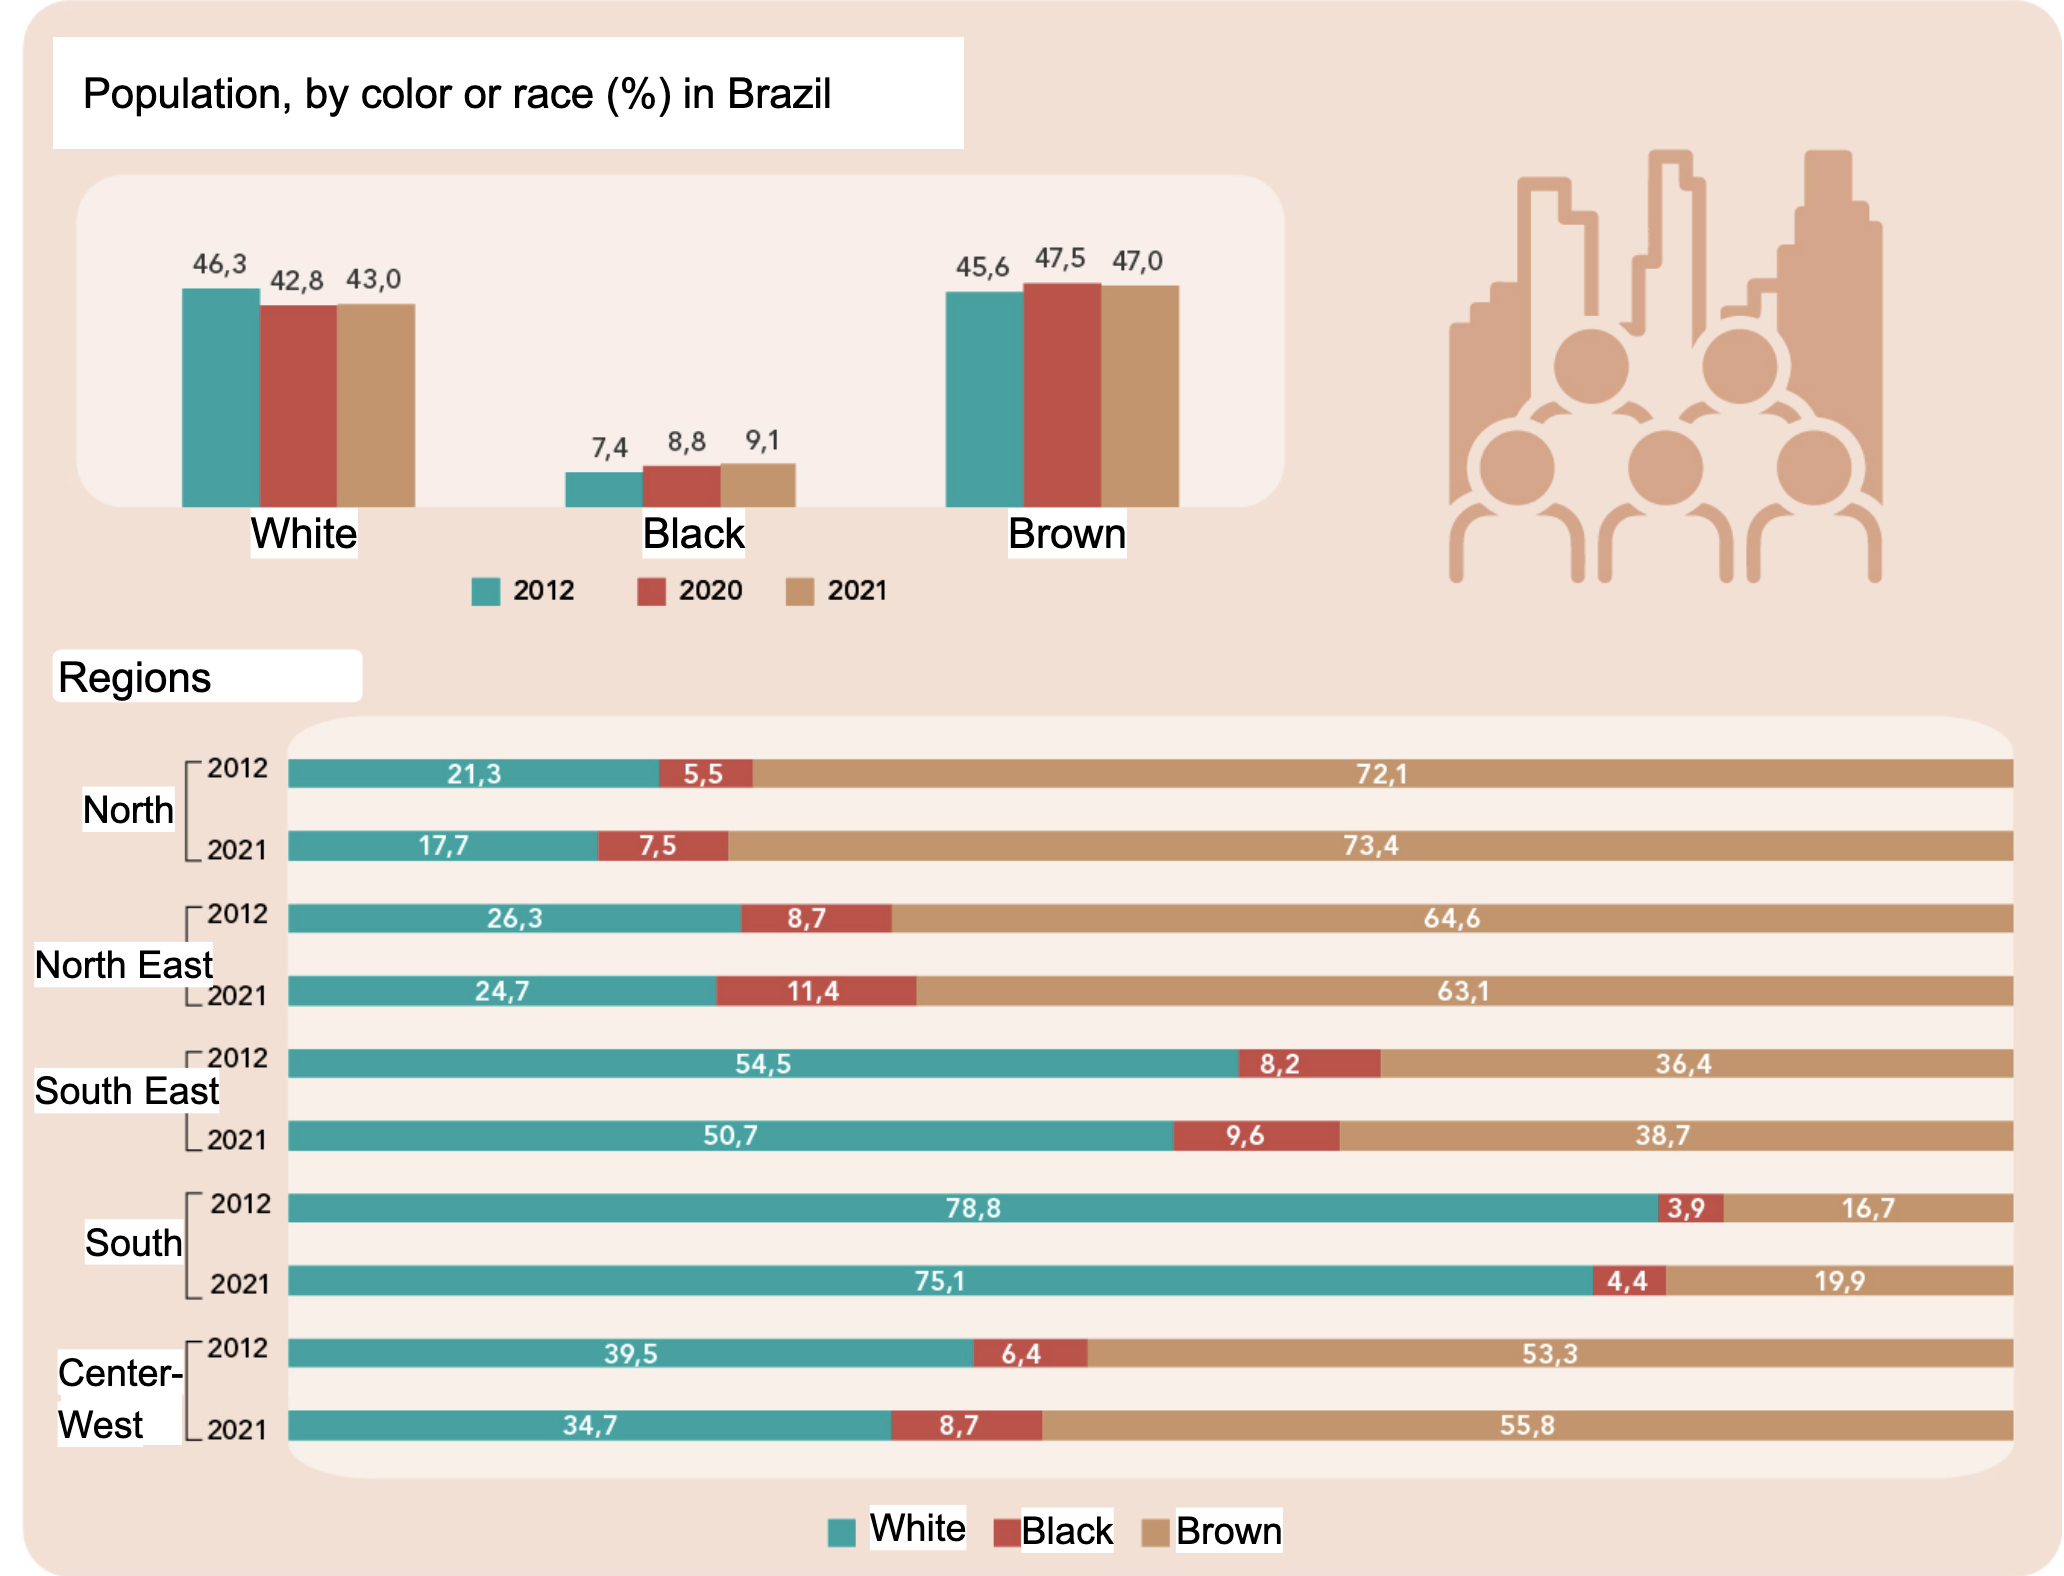 Infographic by the Brazilian Institute of Geography and Statistics, translated by the authors, showing the percentages of the population by color/race in Brazil.